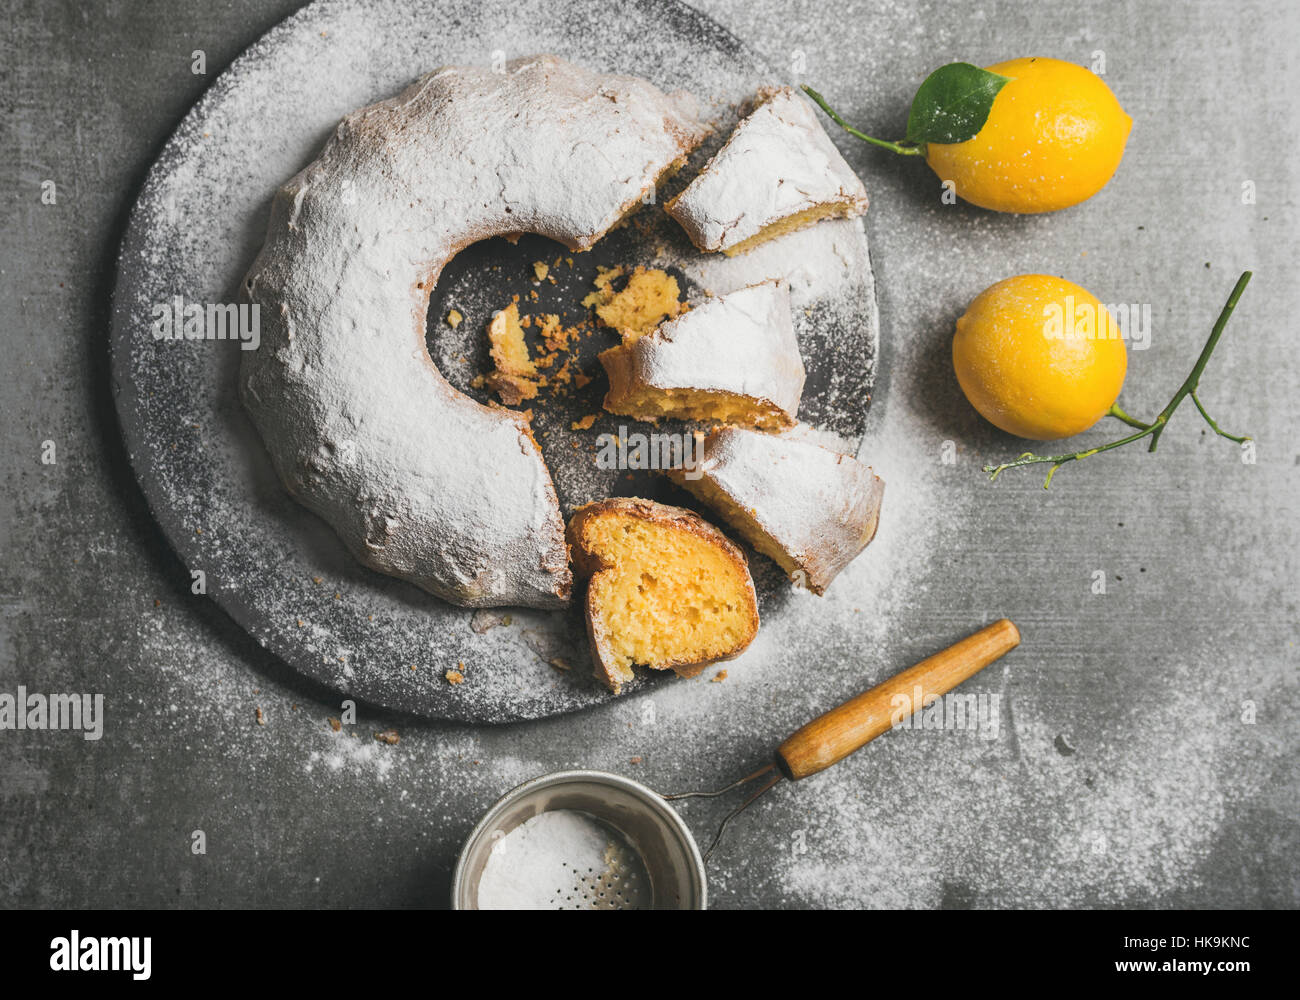 Homemade gluten-free lemon bundt cake with sugar powder served with freshly picked lemons over grey concrete background, top view Stock Photo